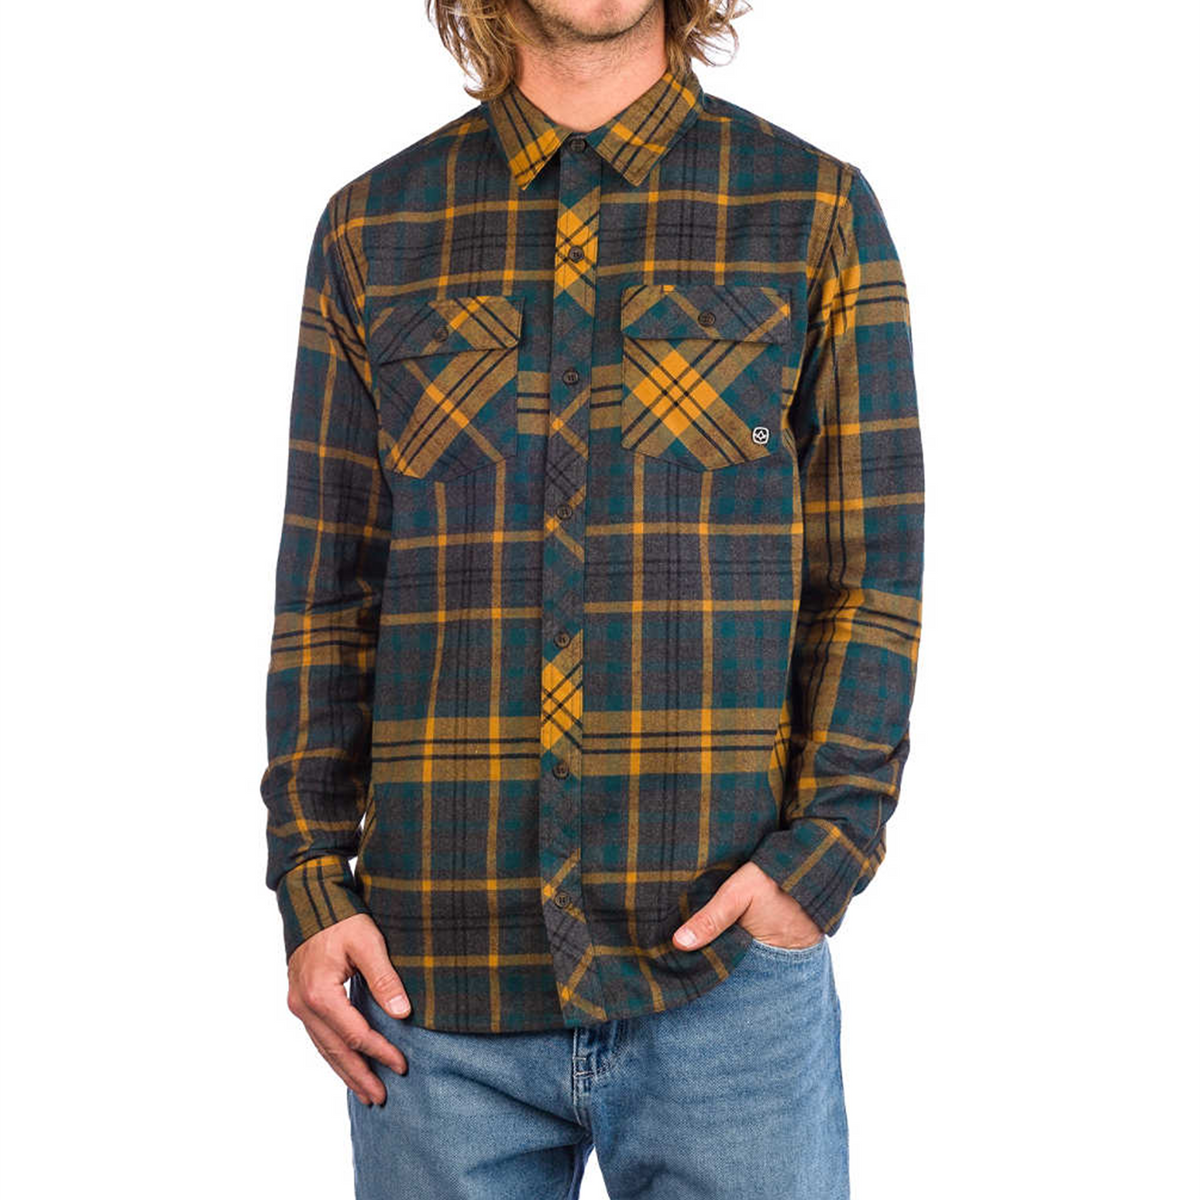 The Rogers Flannel Shirt